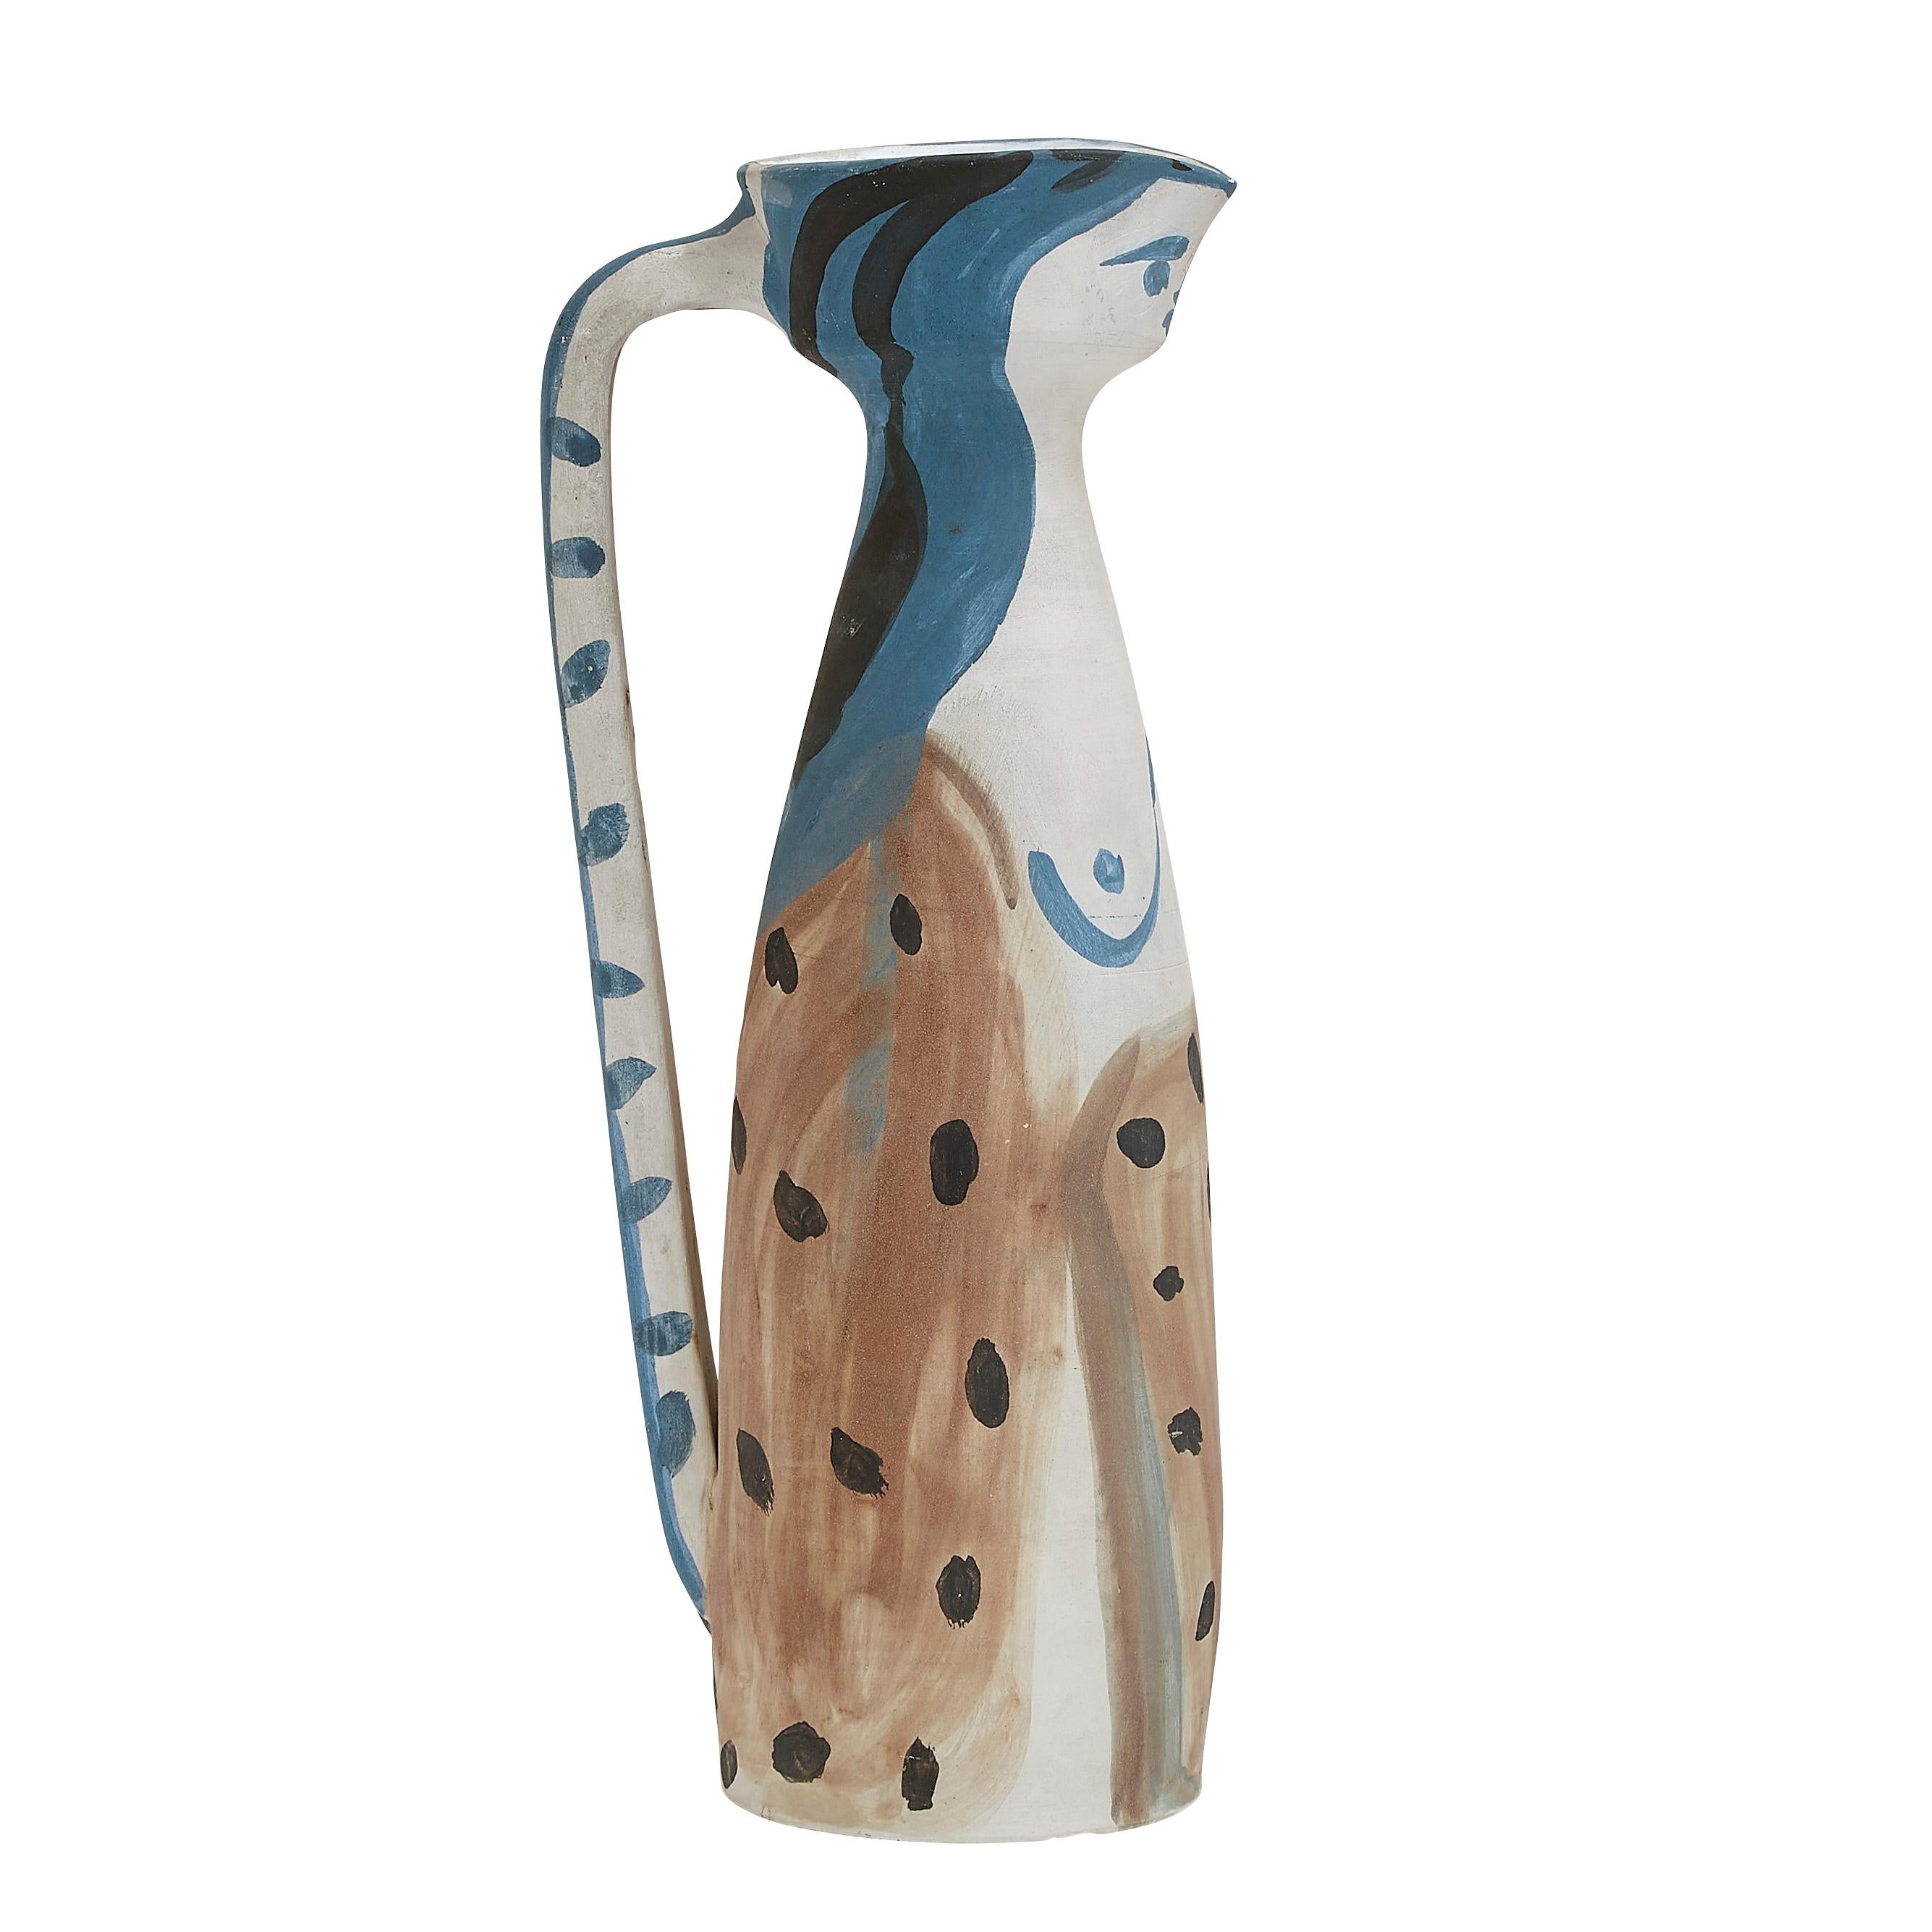 Pablo Picasso 'Femme' (A. R. 296) Female Madoura Pitcher Color Variant 1955 For Sale 1